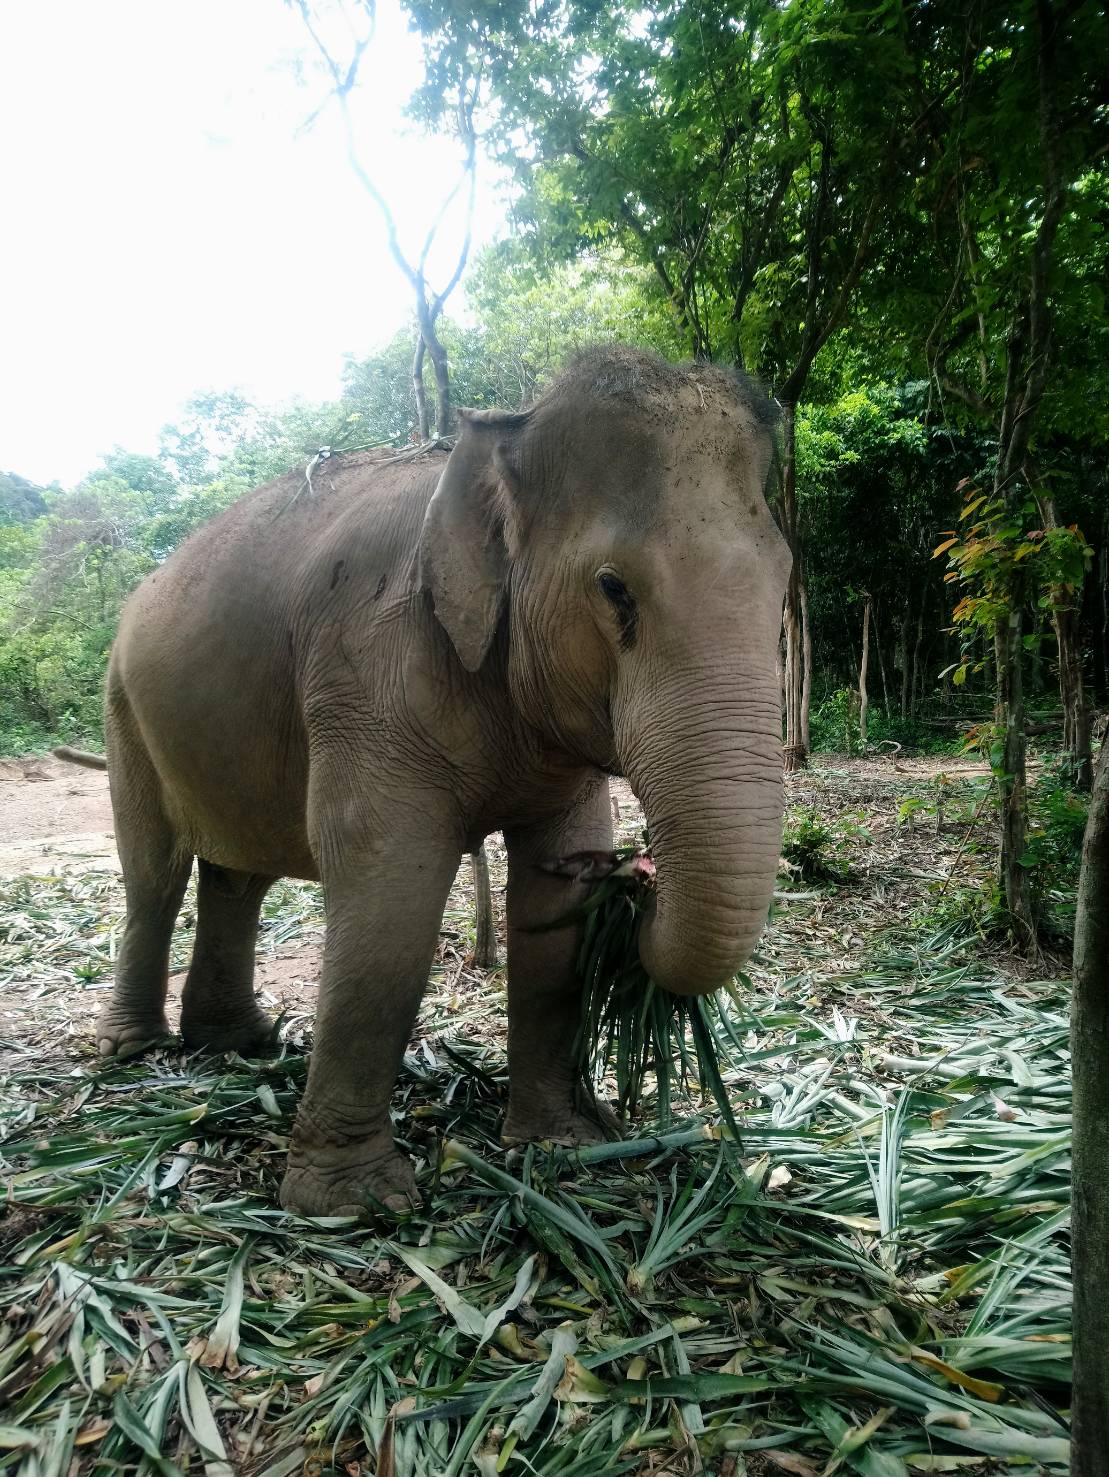 Jahn, a rescued elephant living at high welfare venue Following Giants